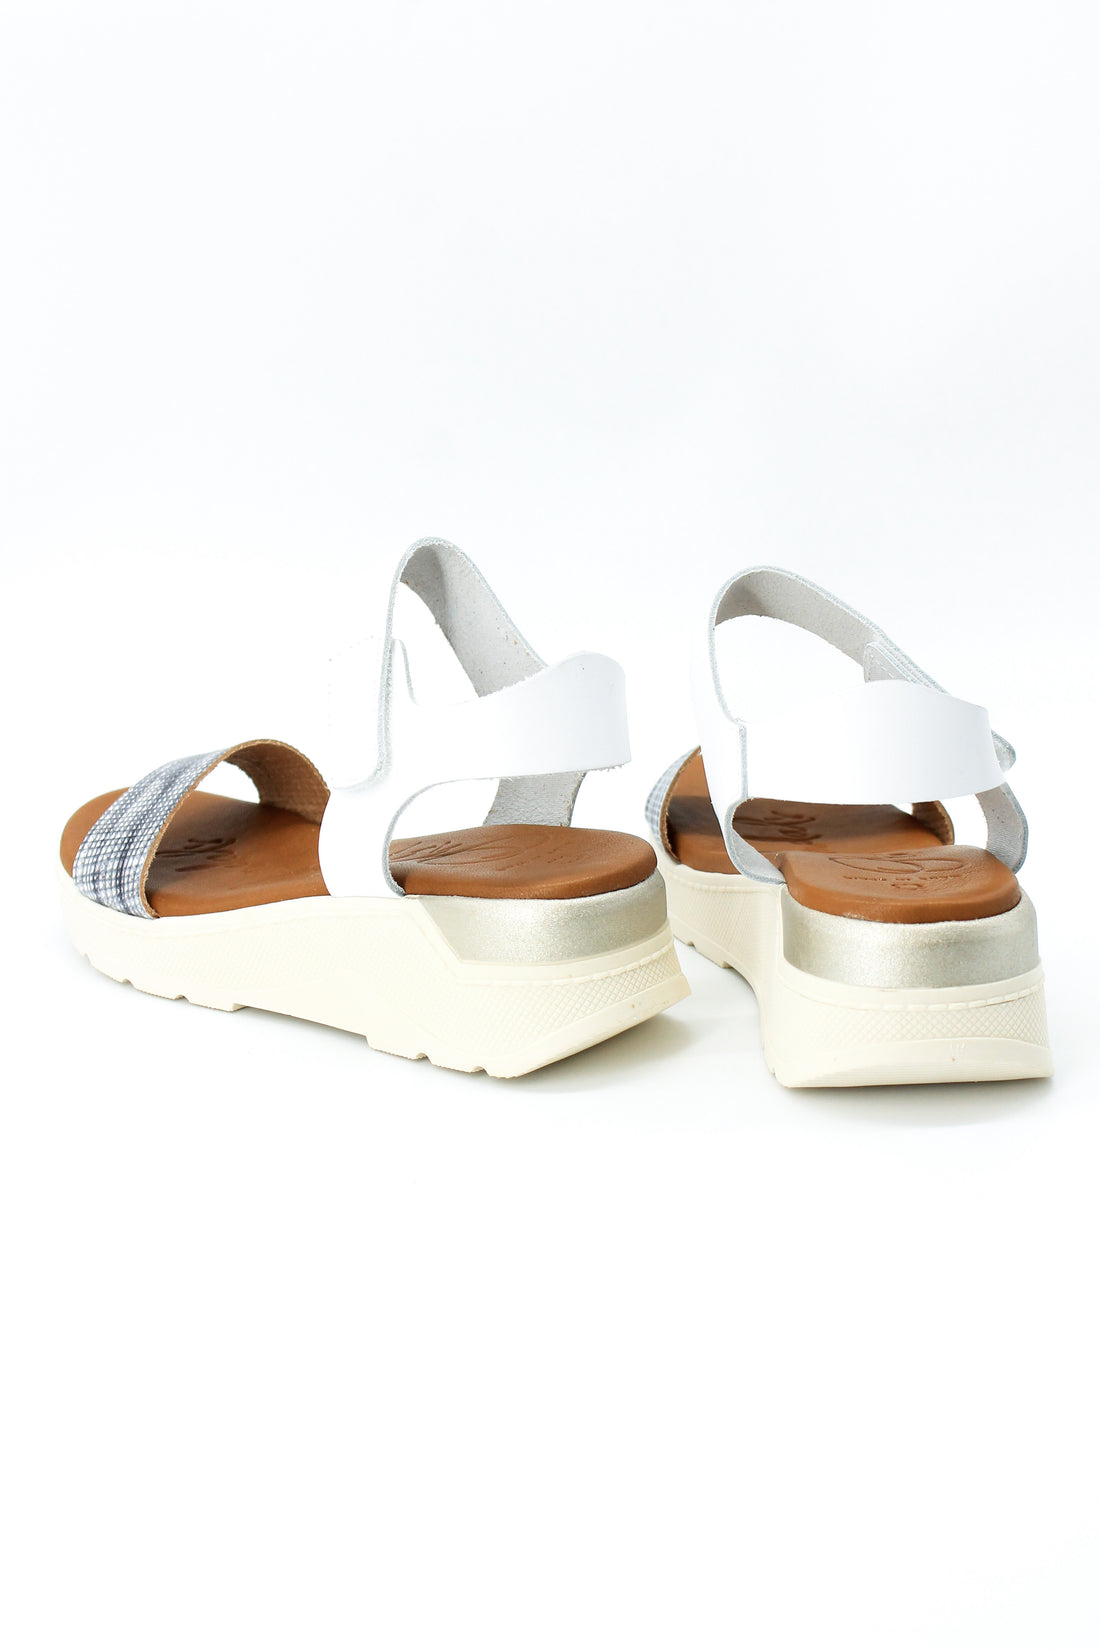 Oh My Sandals 5189 White and Pewter